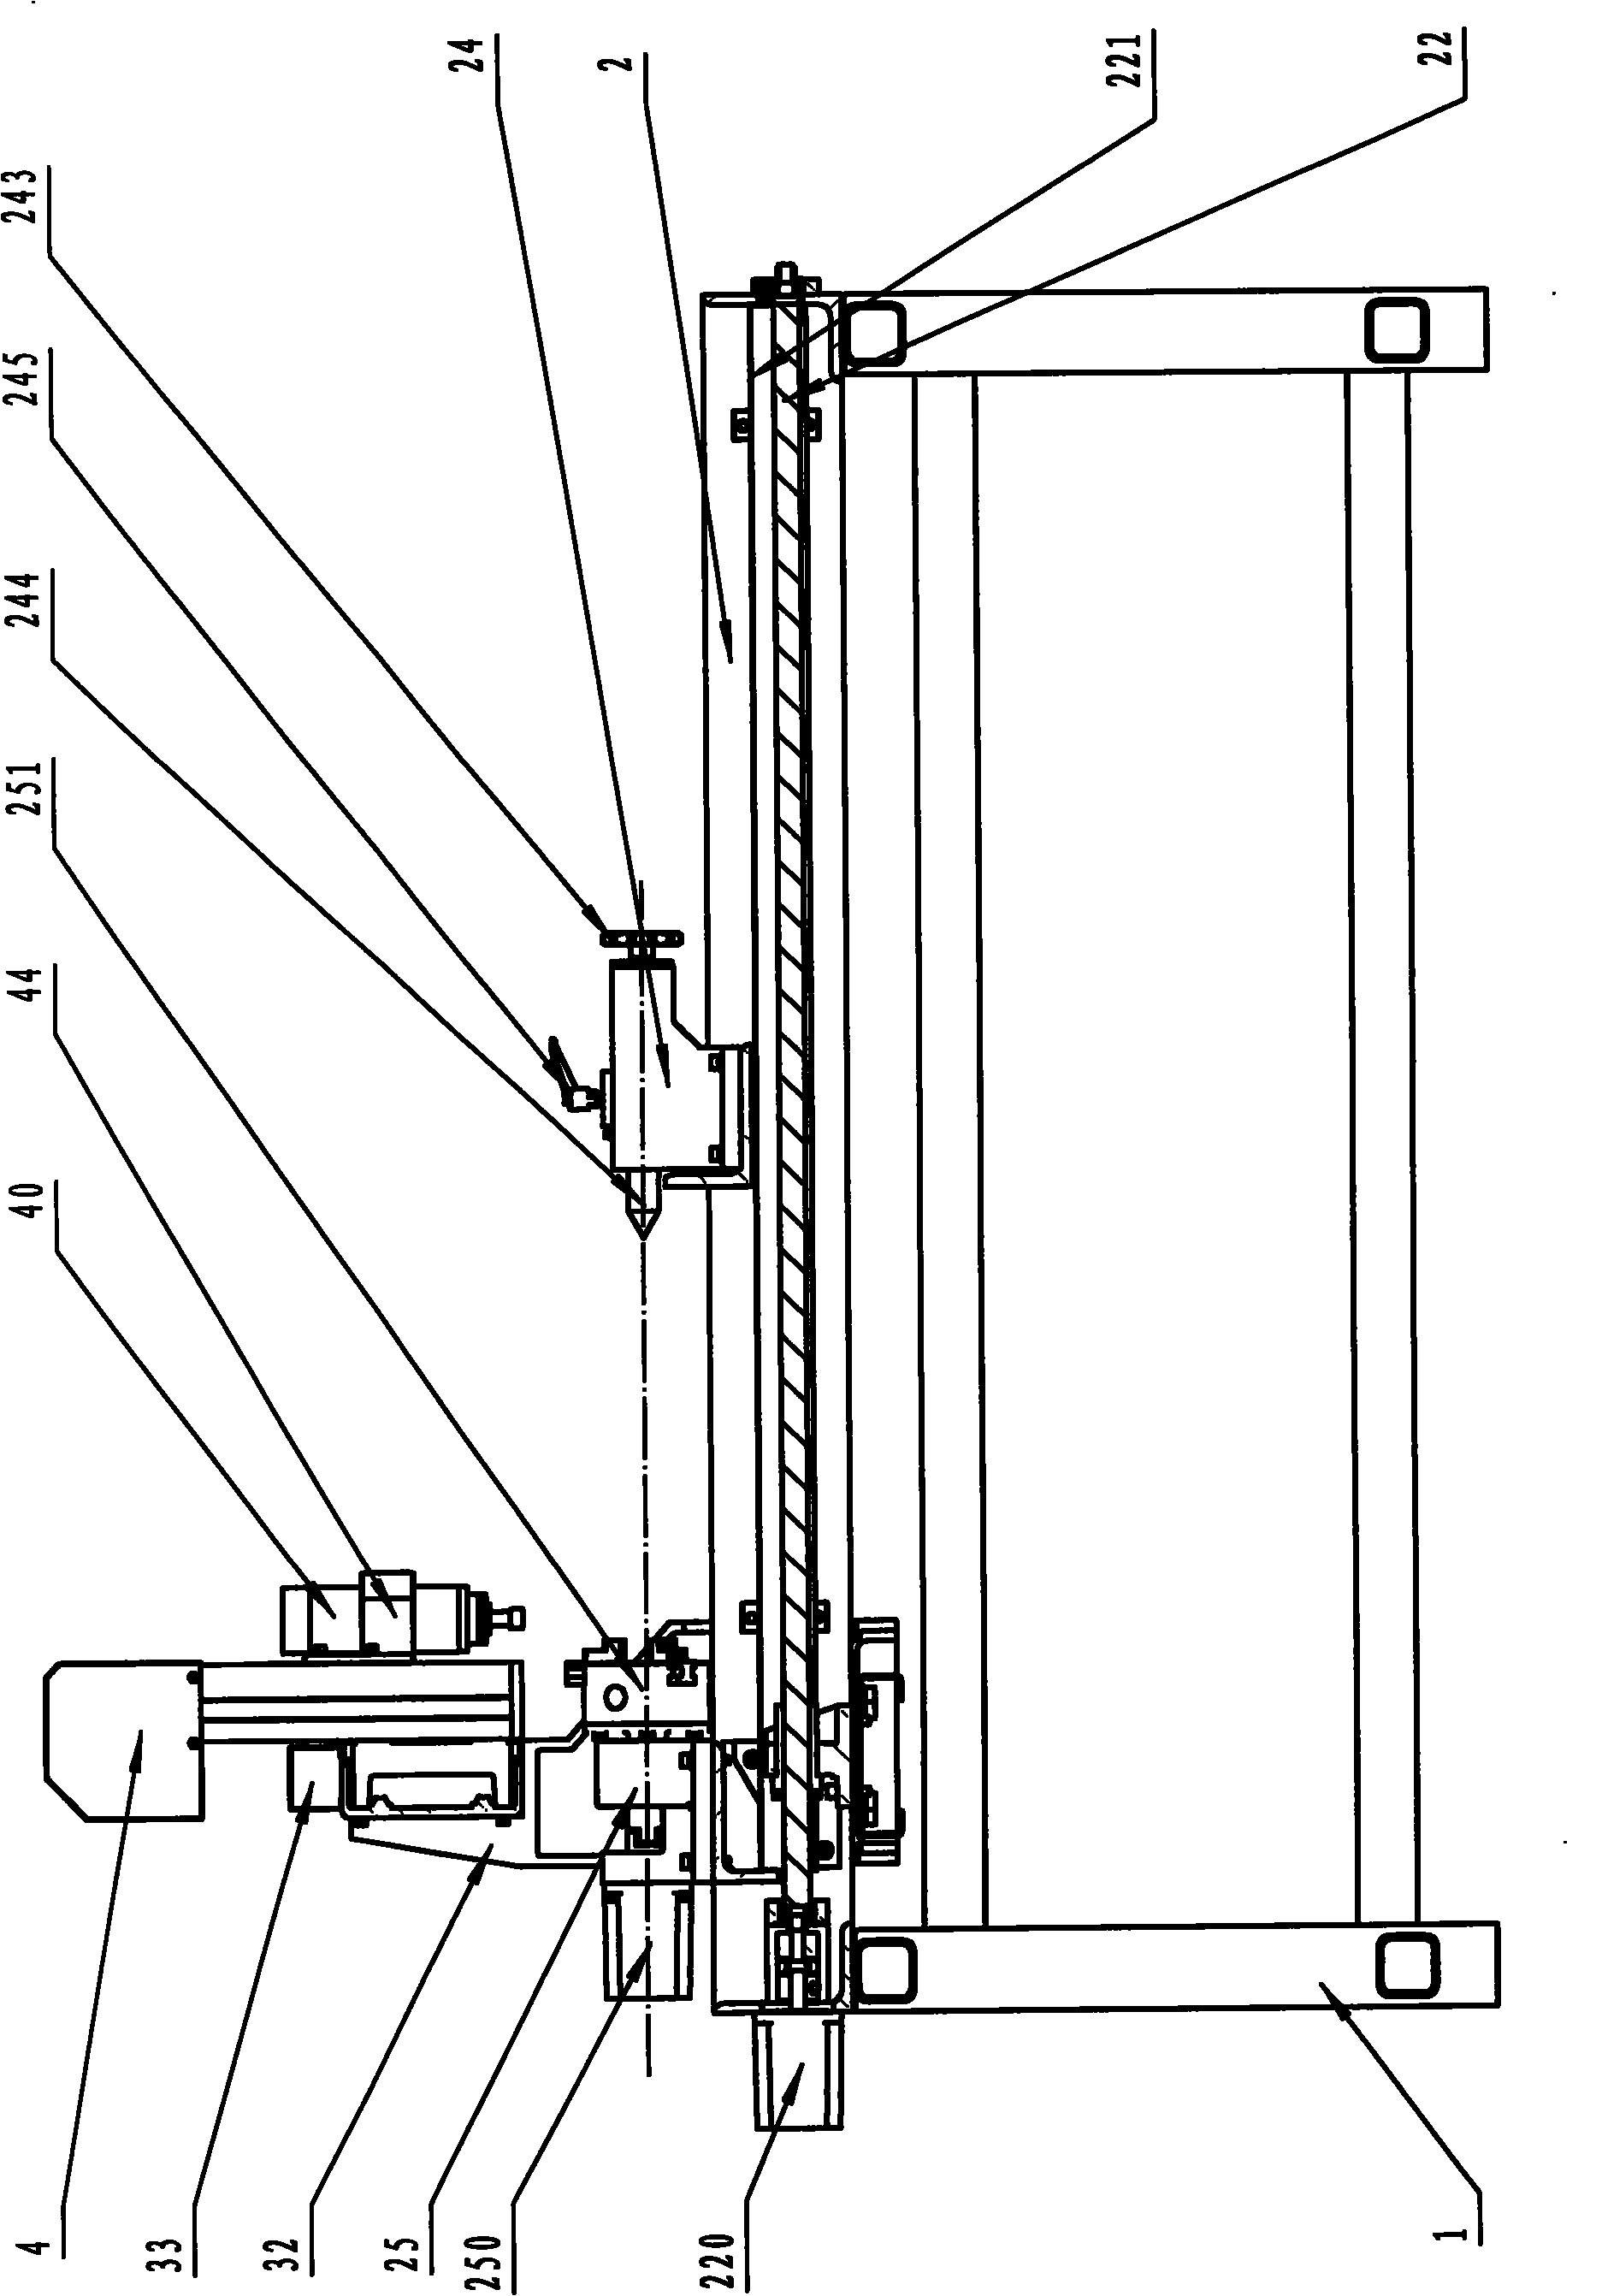 Cylindrical engraving machine